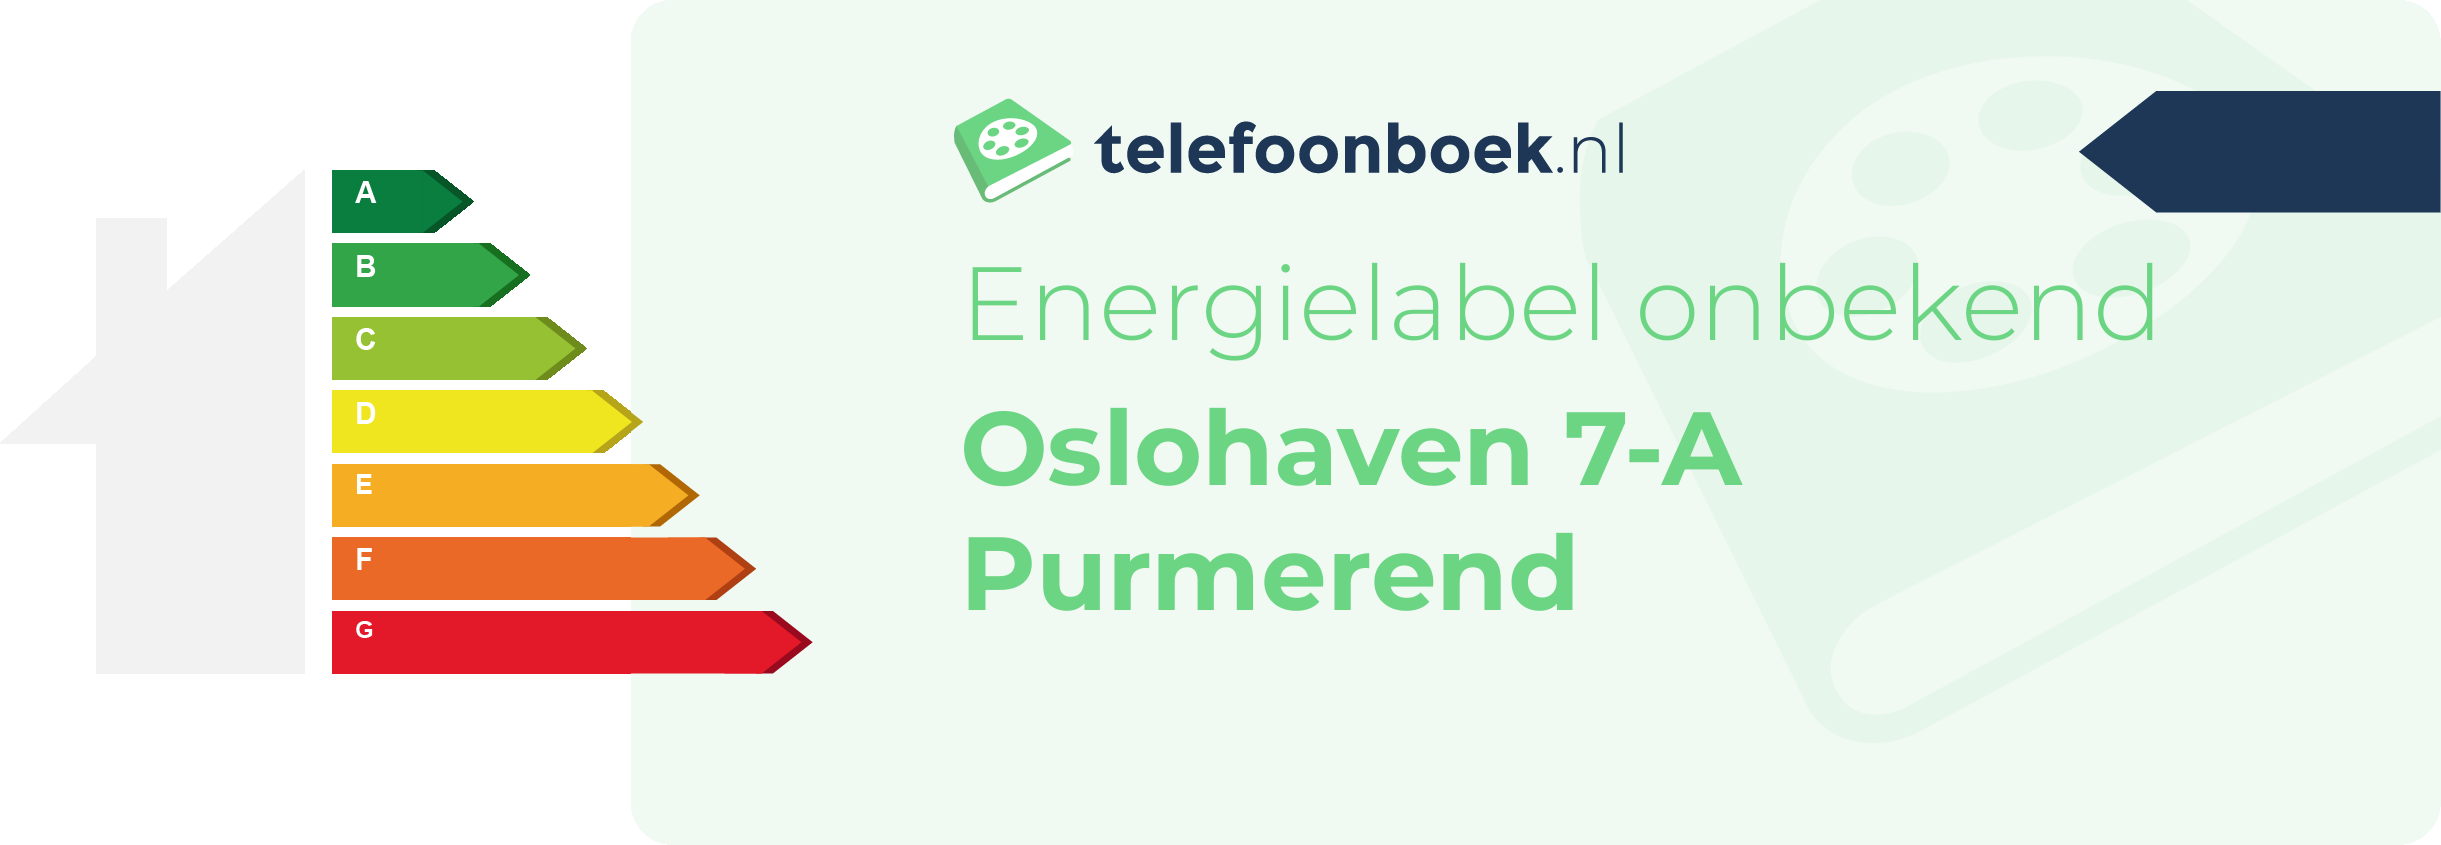 Energielabel Oslohaven 7-A Purmerend